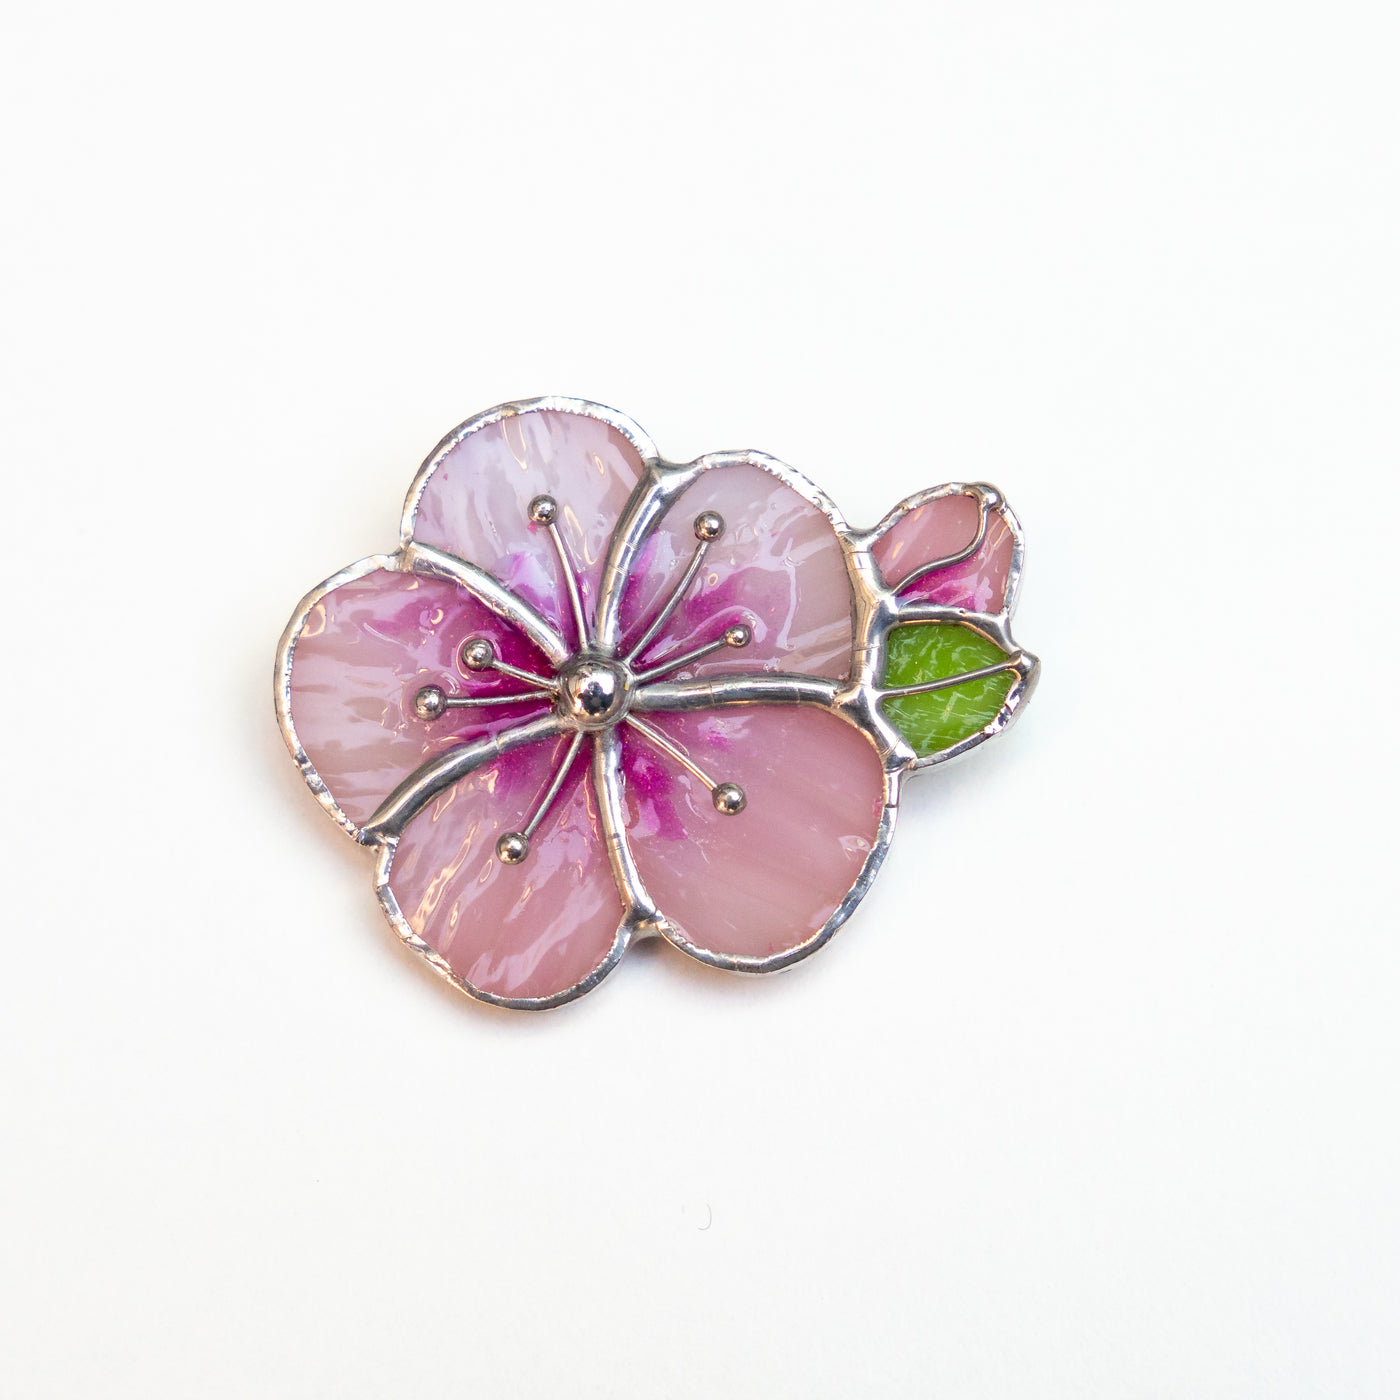 Apricot blossom flower with a green leaf brooch of stained glass